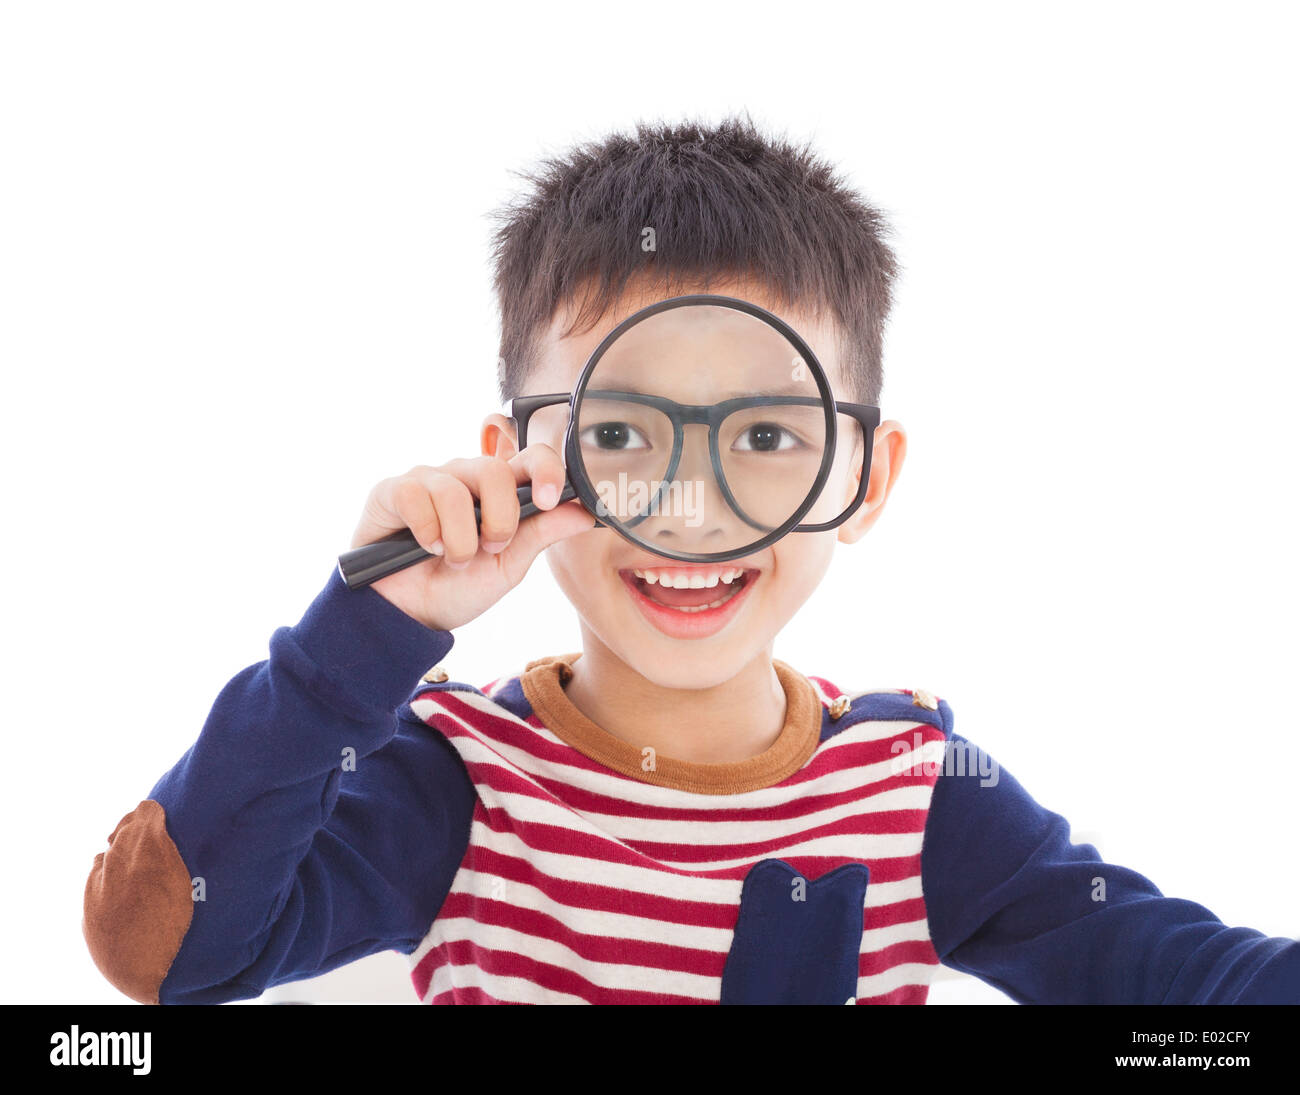 adorable boy holding a magnifier and watching through Stock Photo